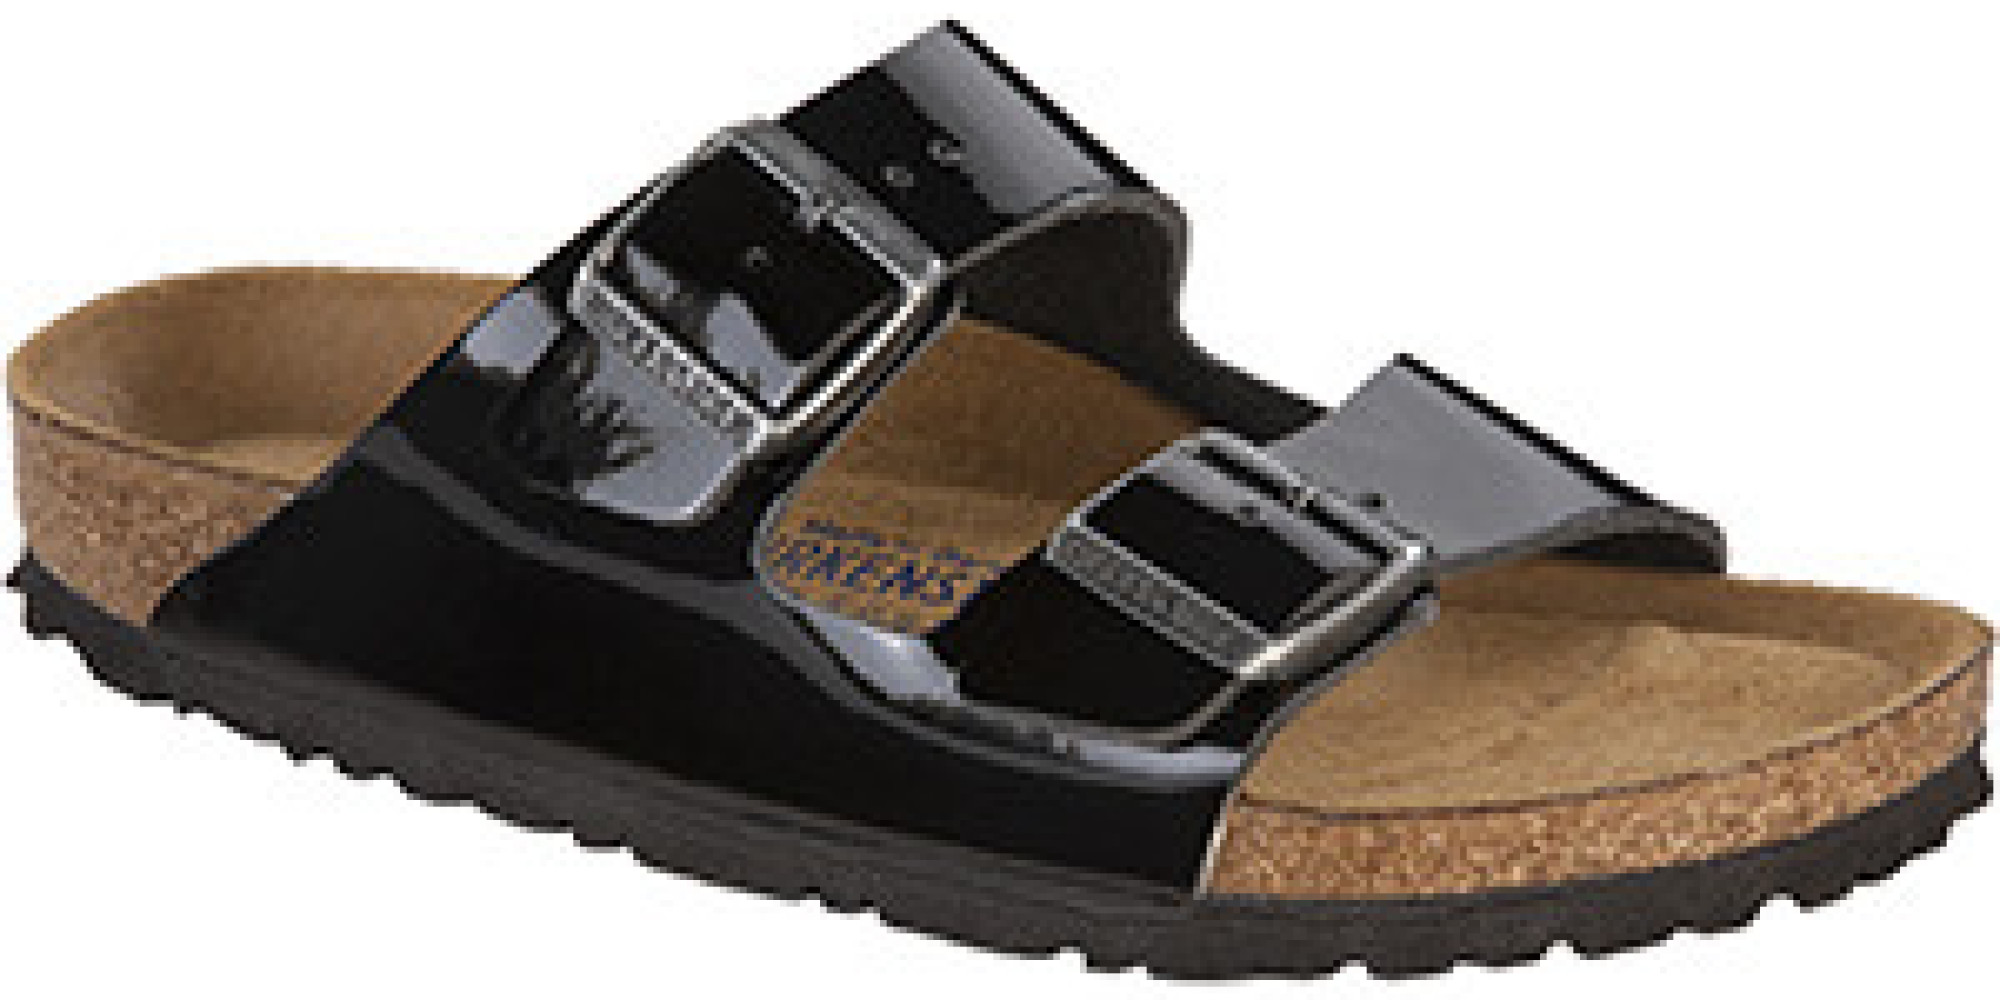 Birkenstocks, Tye-Dye Shirts And 16 Other Things You Probably Owned If ...